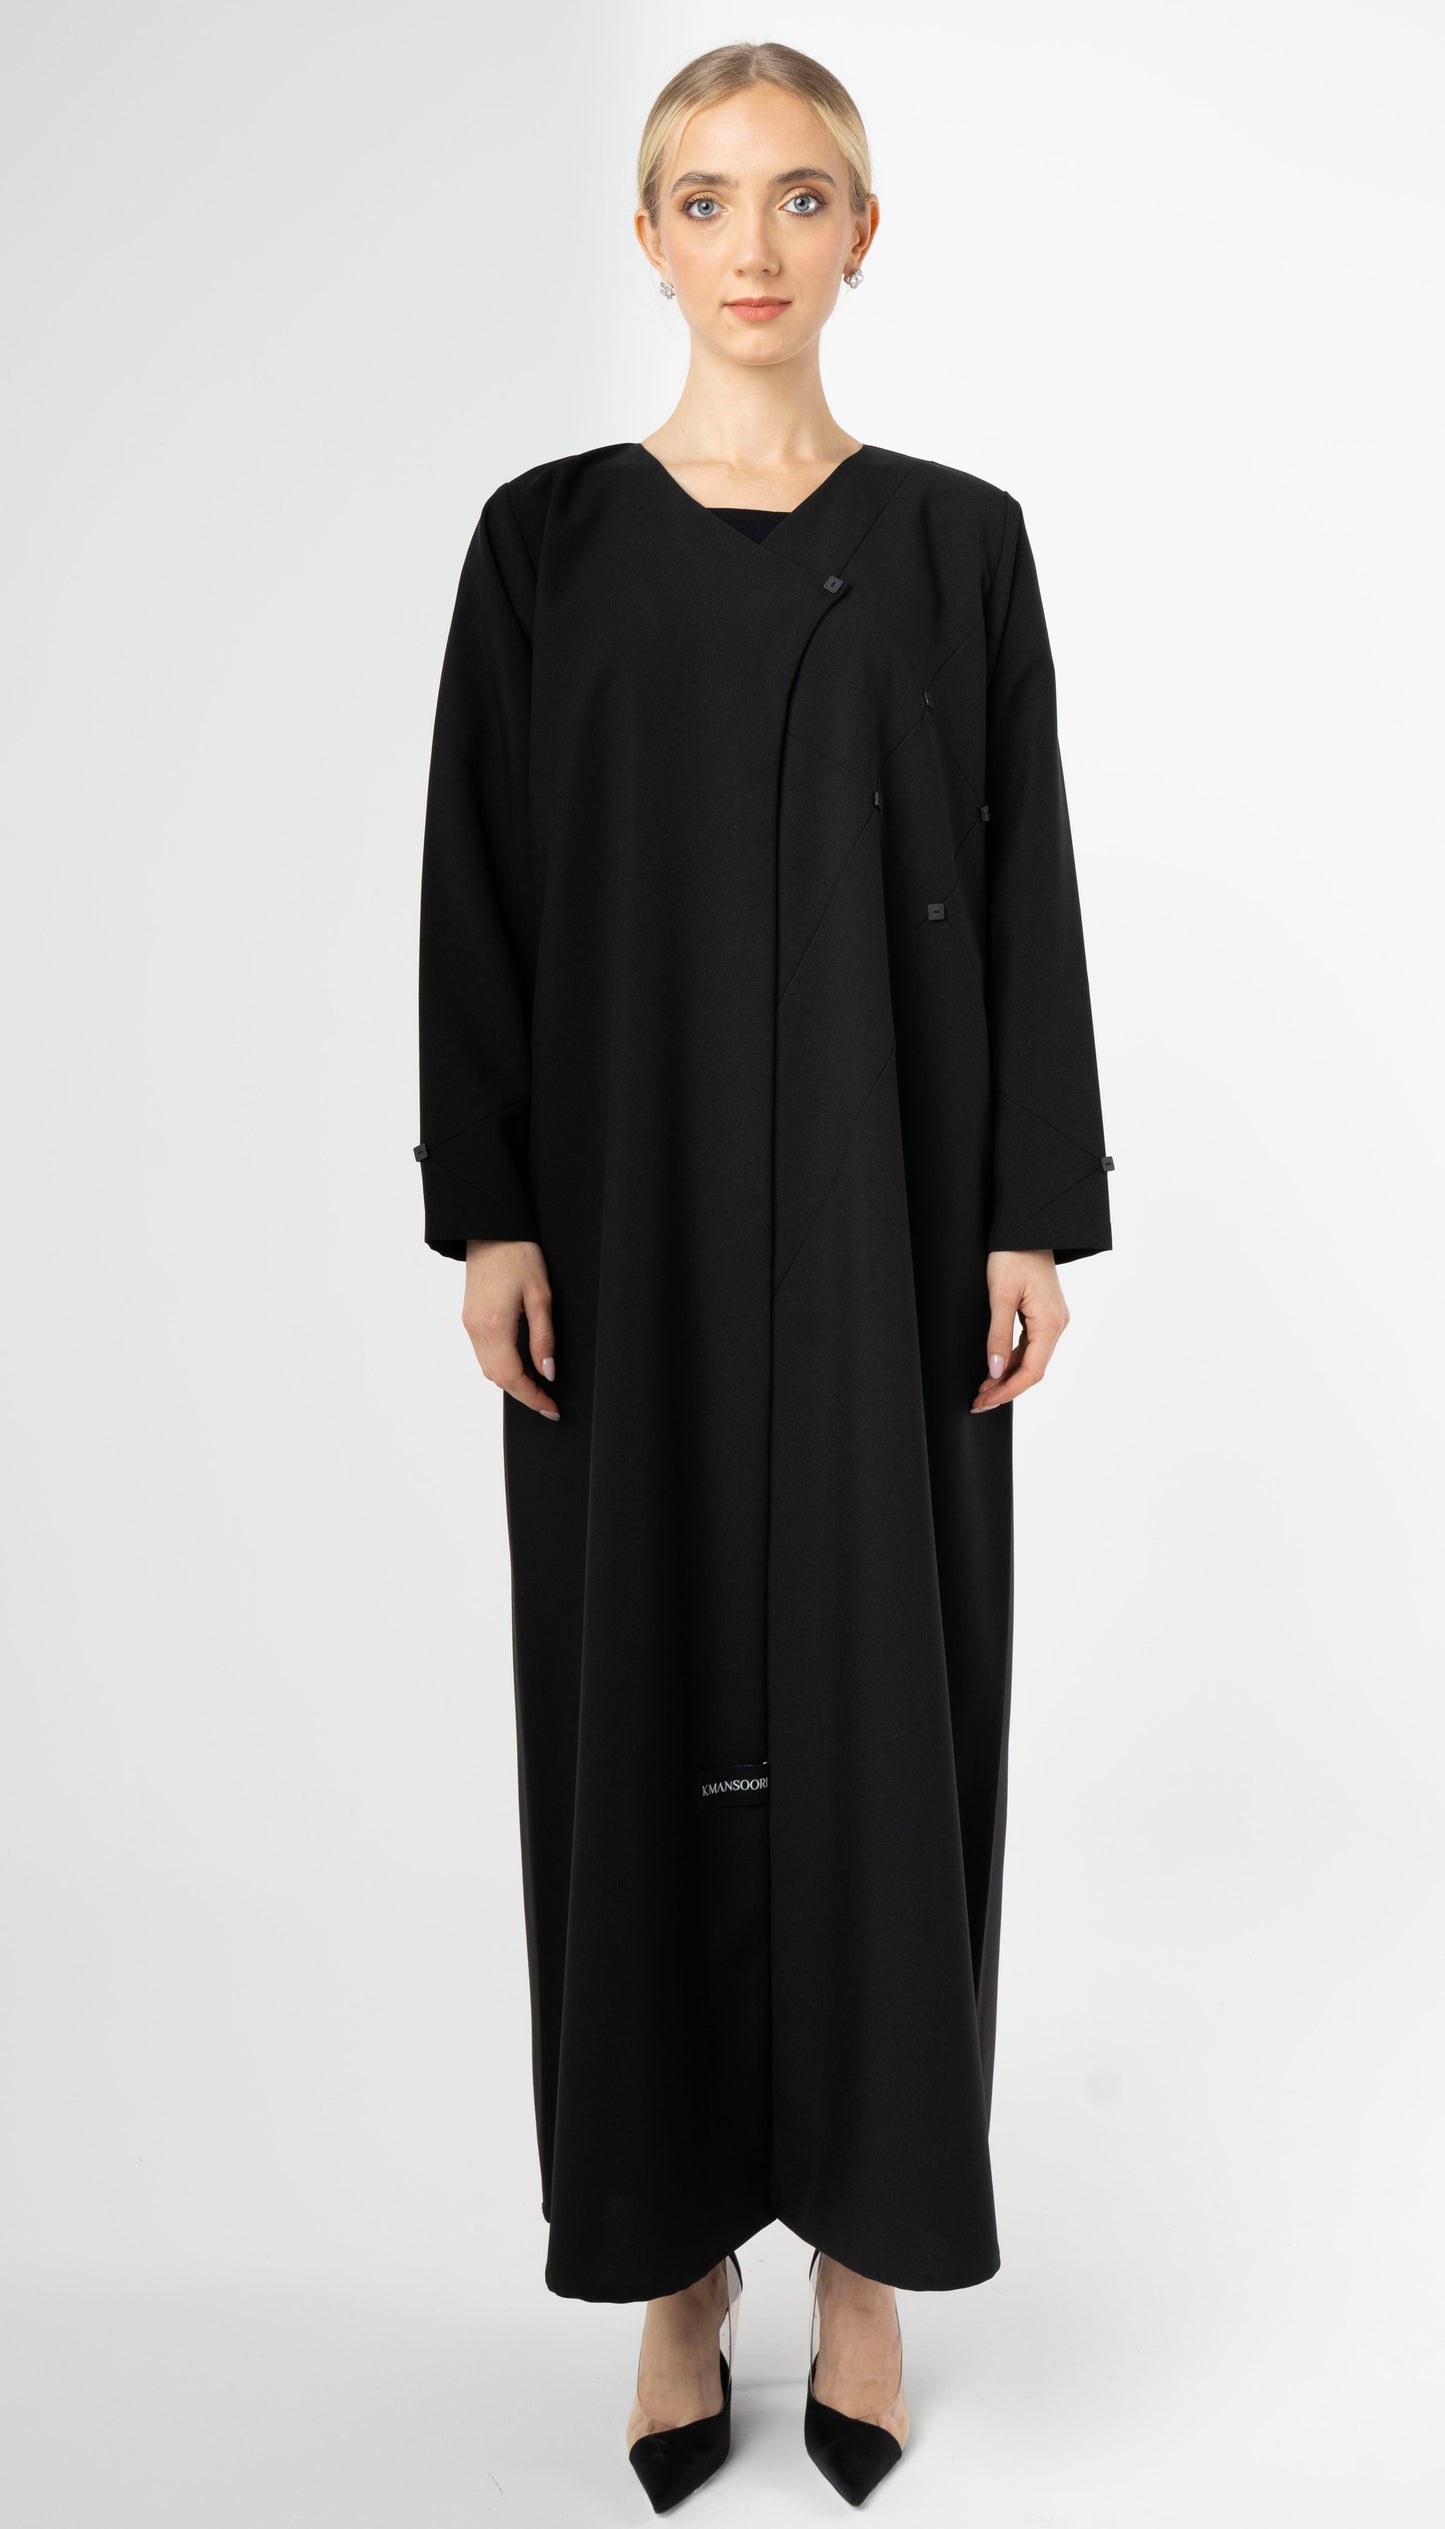 Black Abaya With Stitch Lines On Front And Sleeves